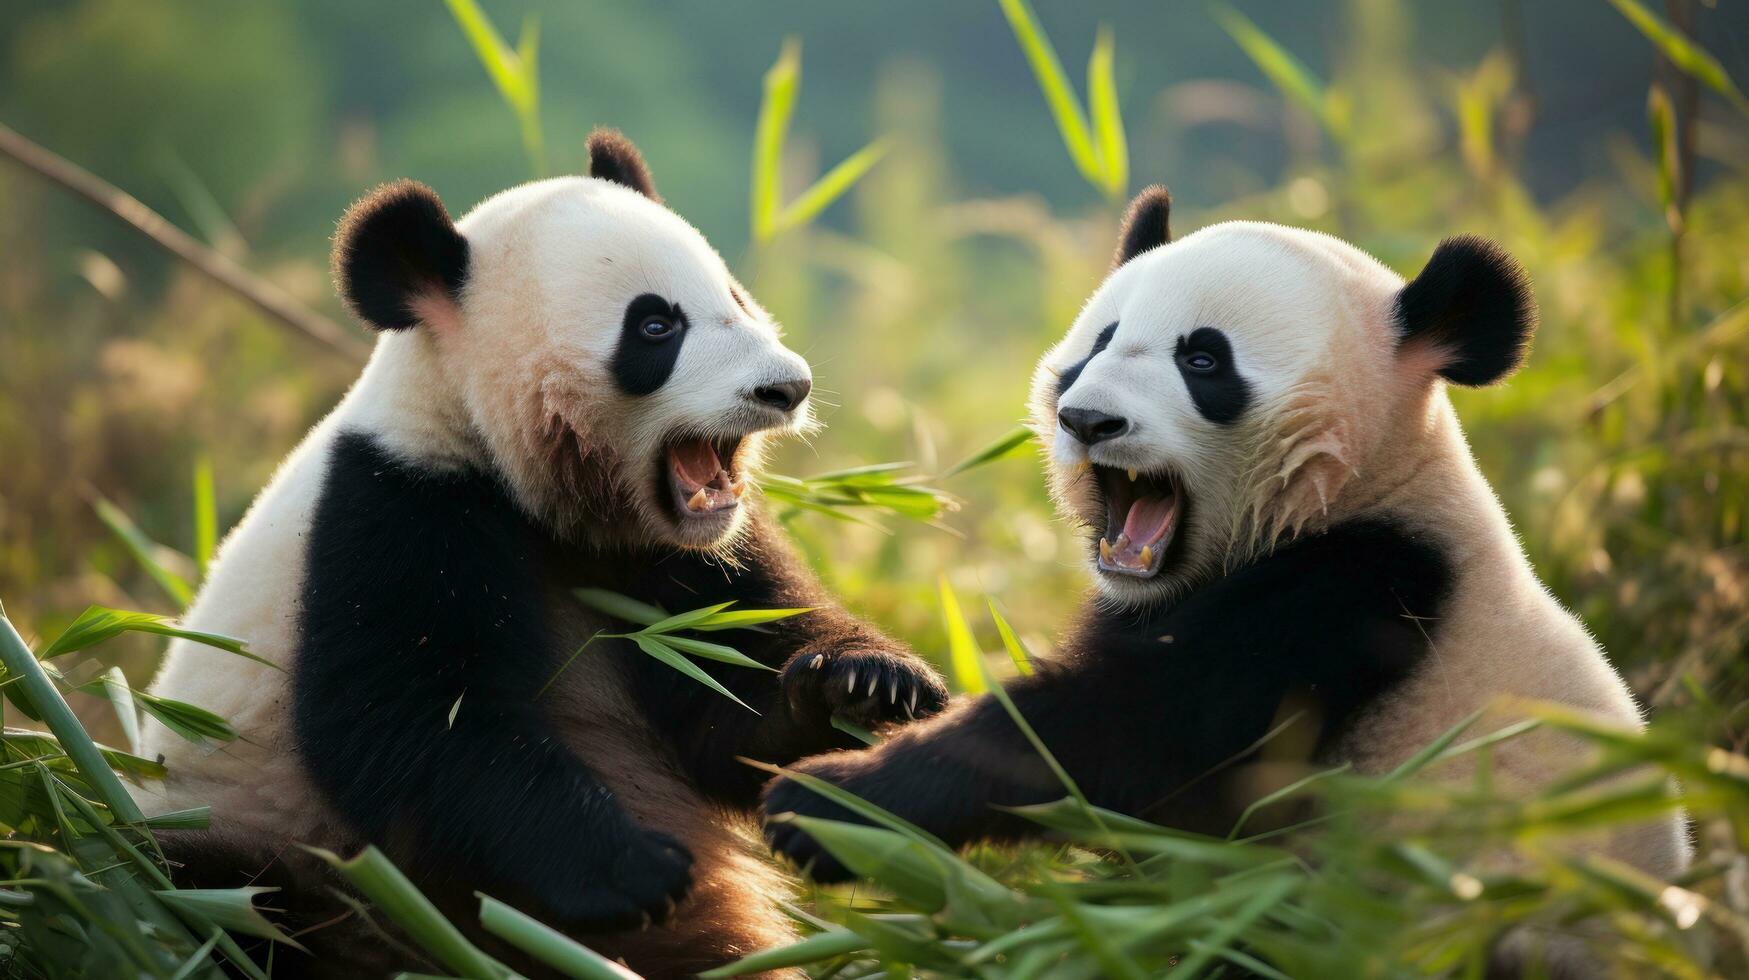 Two pandas playfully wrestling in a grassy field photo